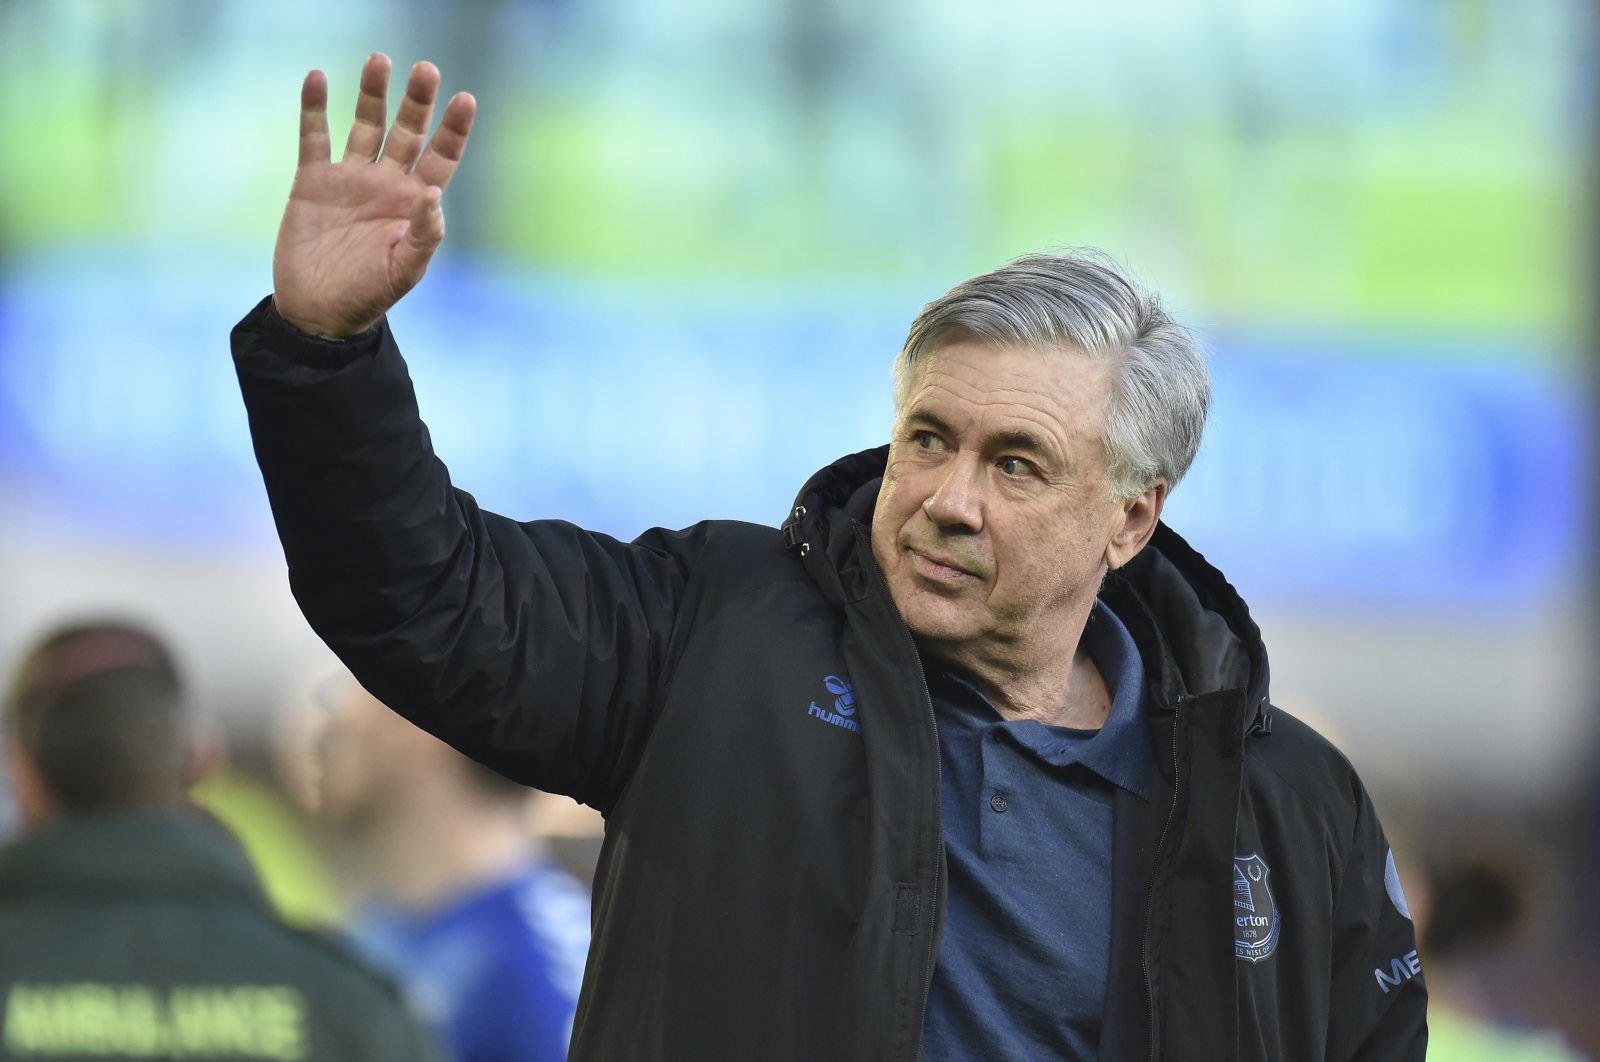 Everton's manager Carlo Ancelotti waves after the English Premier League soccer match between Everton and Wolverhampton Wanderers at Goodison Park stadium in Liverpool, England, May 19, 2021. (AP Photo)